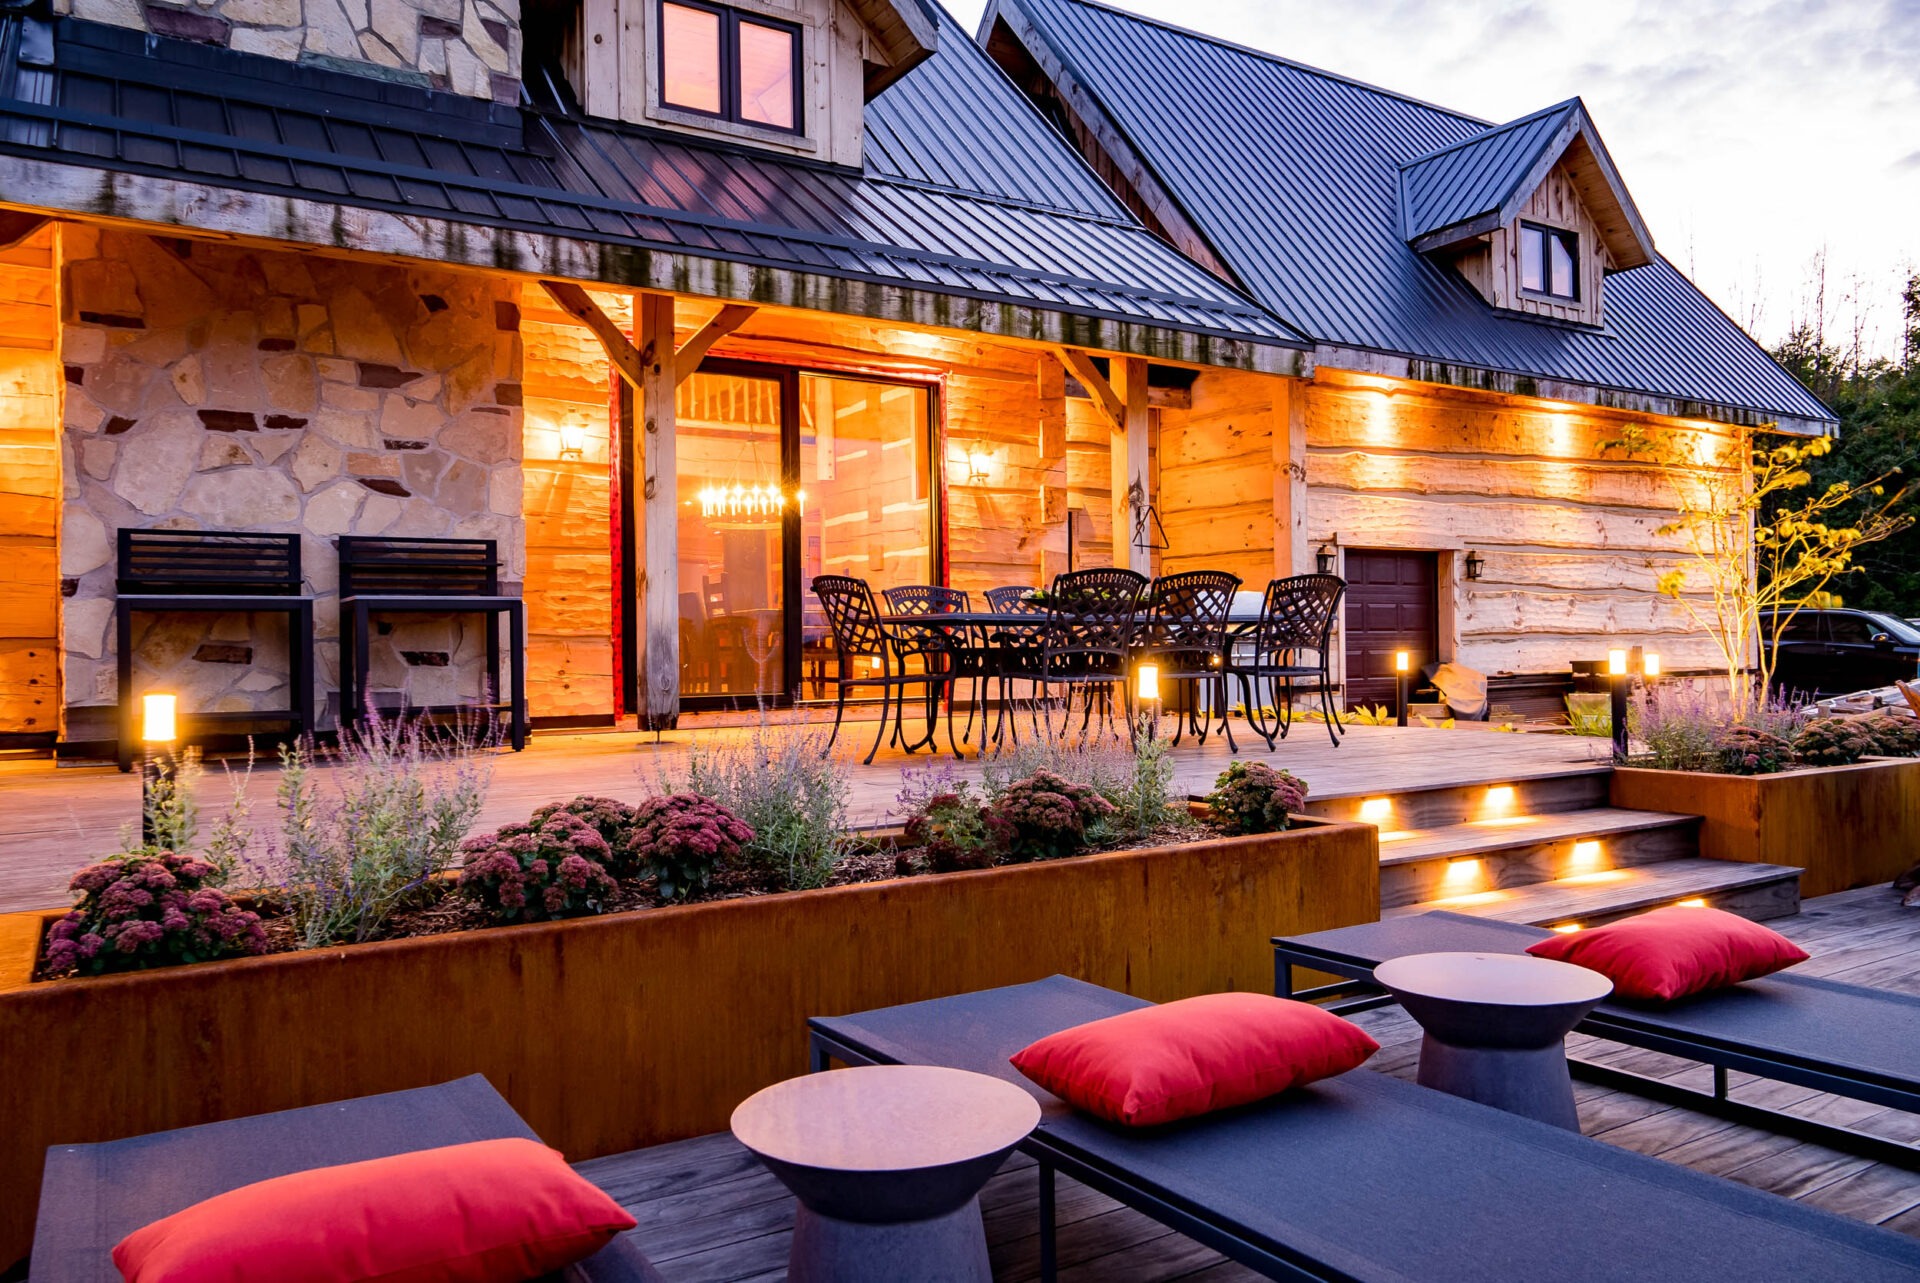 A cozy outdoor patio of a log cabin with warm lighting, comfortable seating, a dining area, and lush plants during twilight.